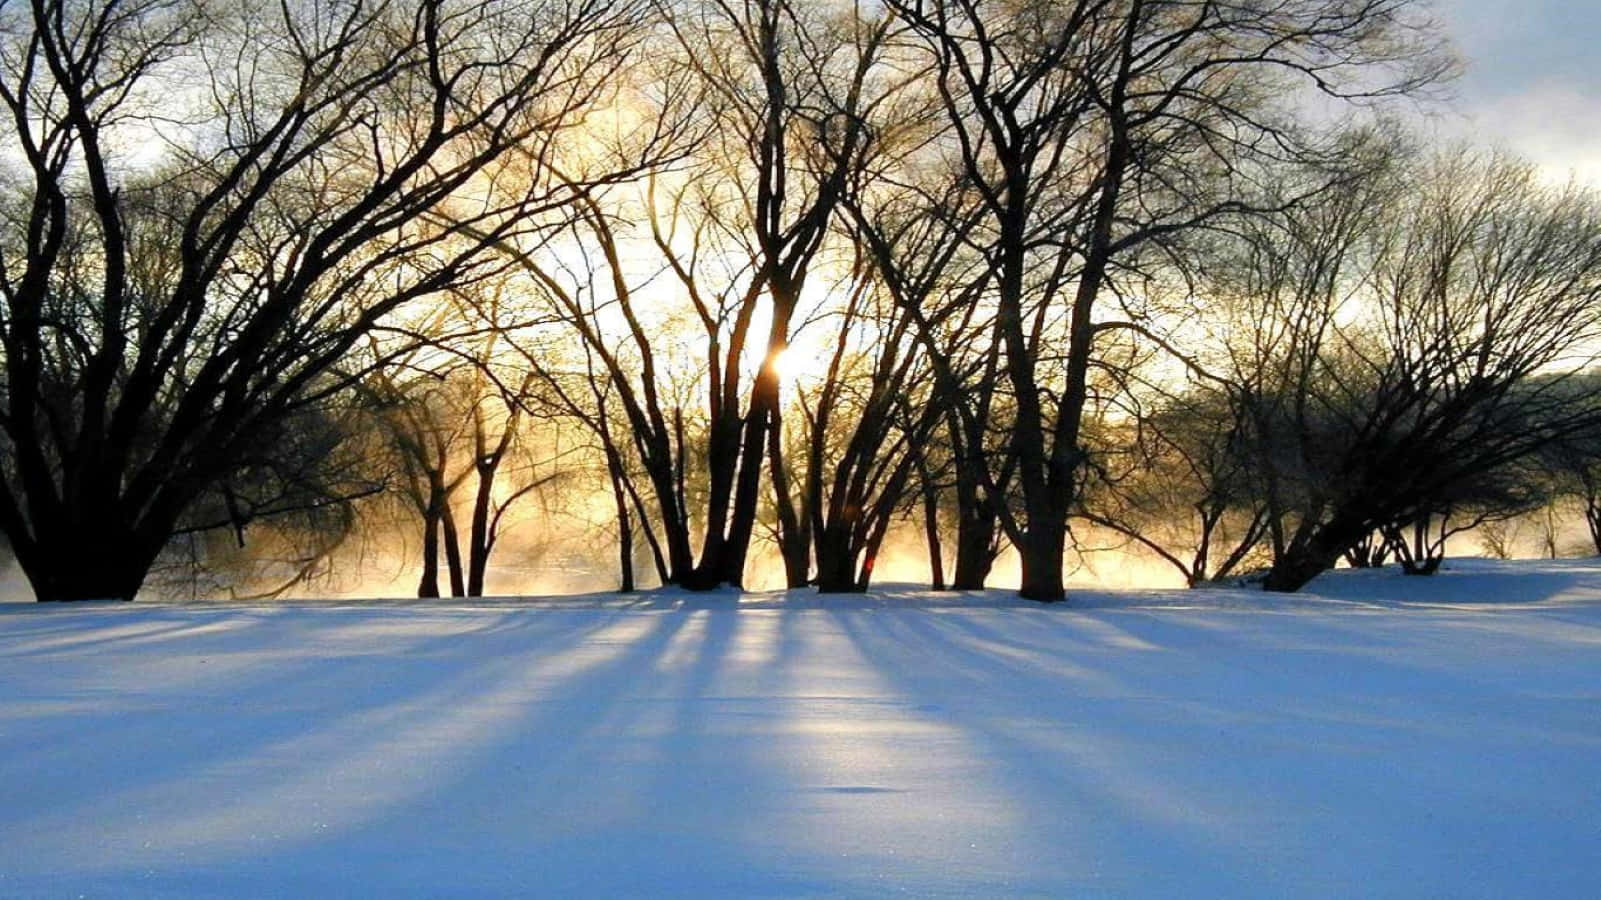 Celebrate the Winter Solstice with a Scenic Snowy Landscape Wallpaper